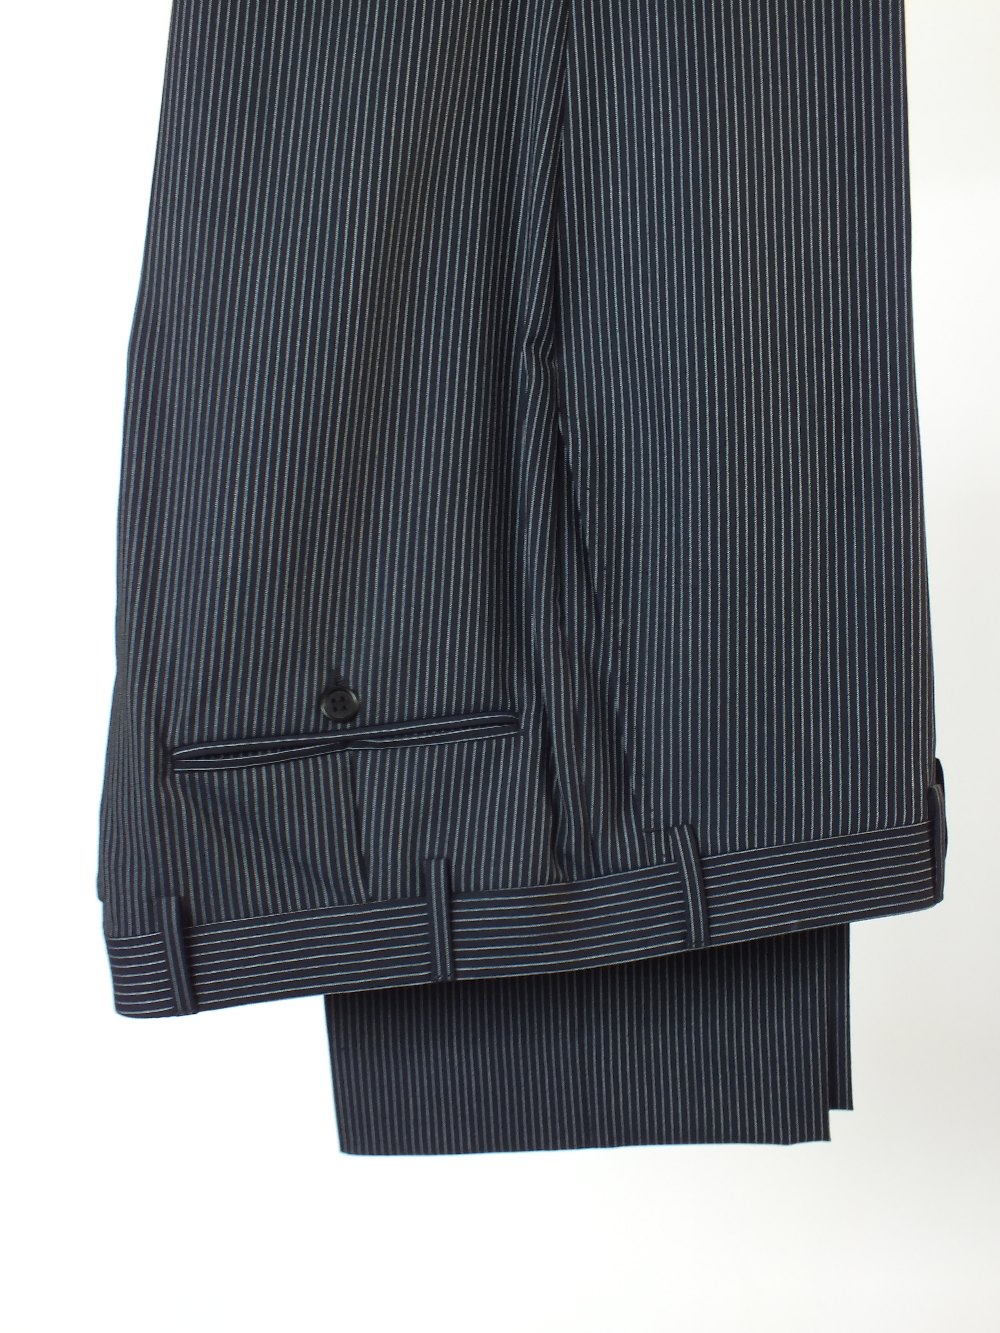 A Canali suit, navy pinstripe, single vent, Italian size 50R, 100% wool, flat front to trousers - Image 6 of 6